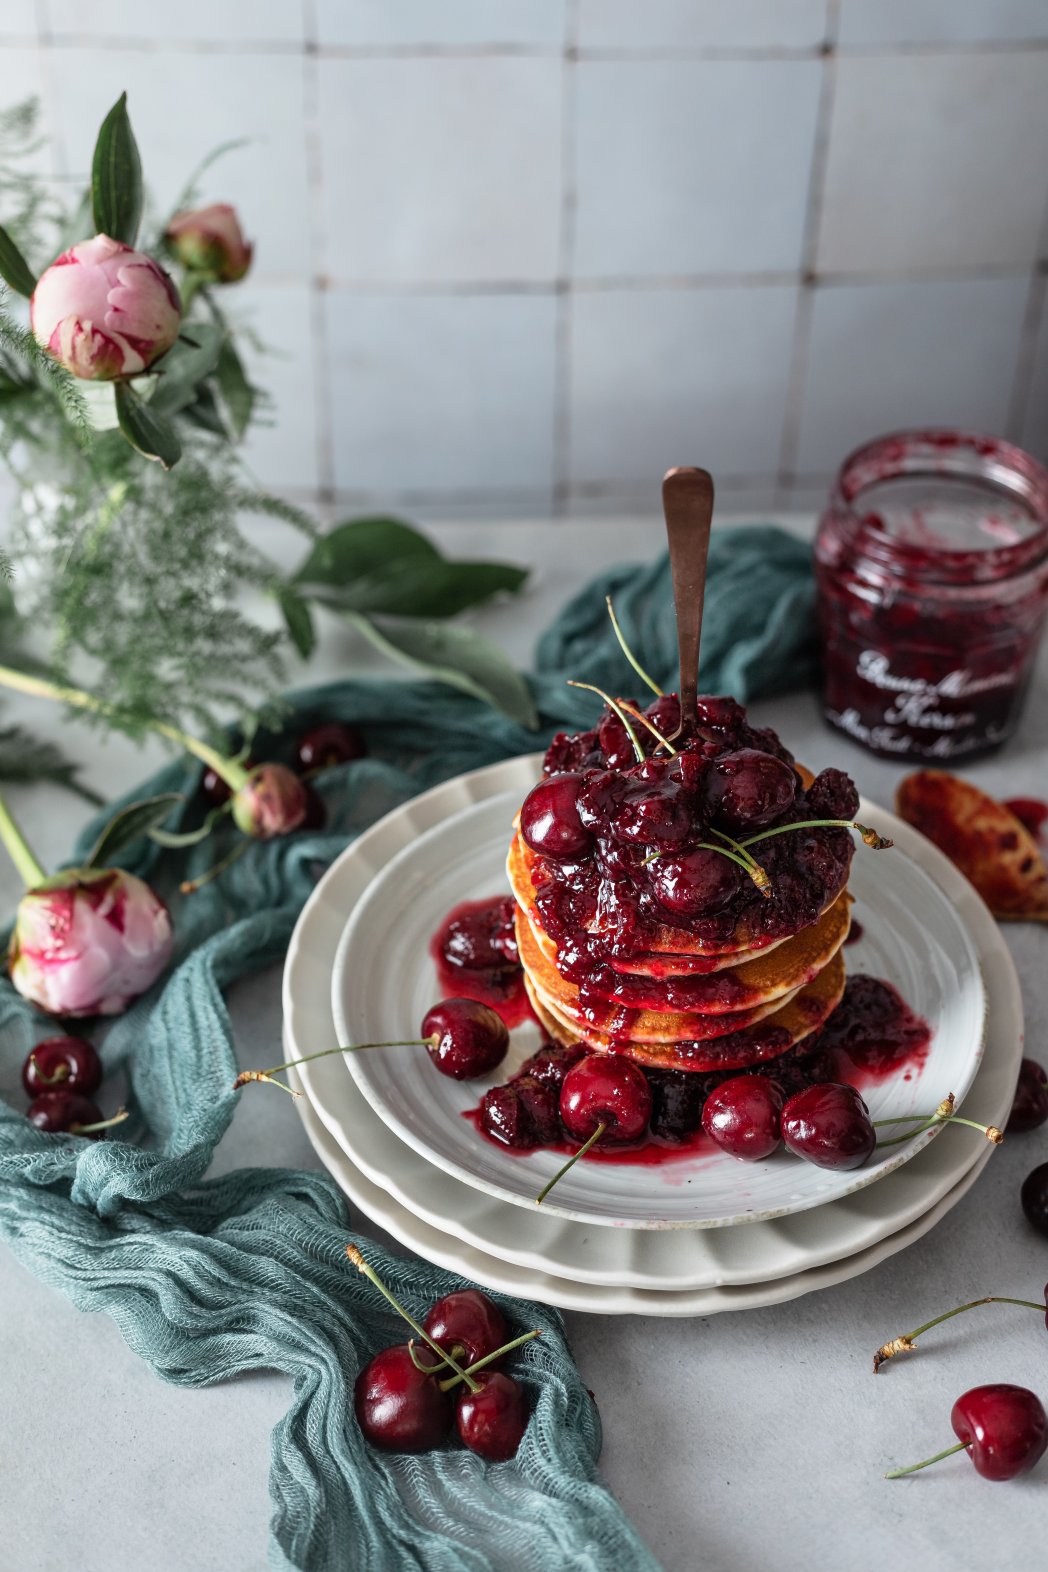 Poppy pancakes with cherry compote